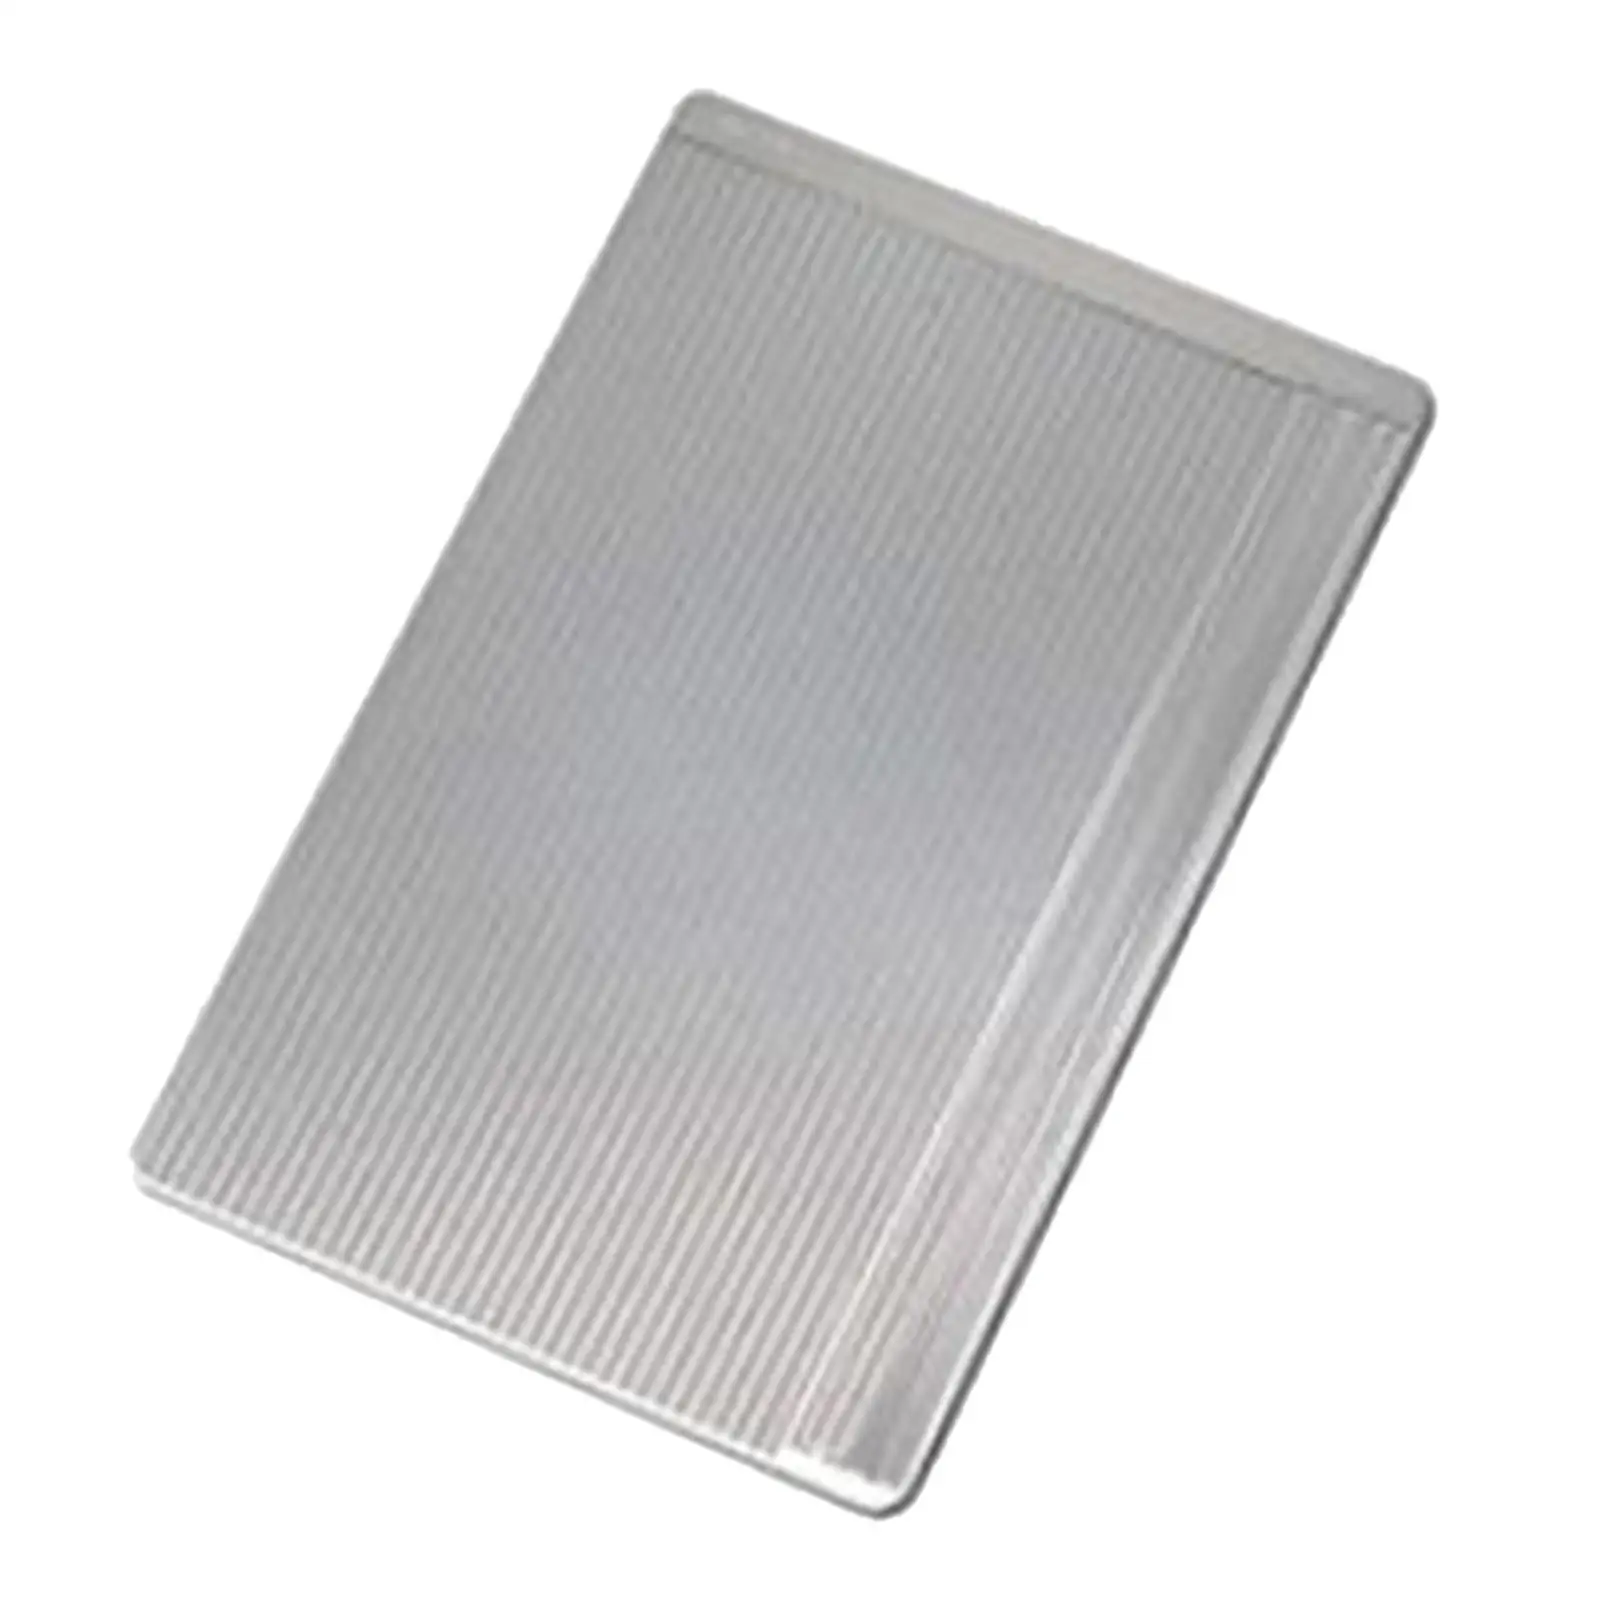 Metal Etching Sheet Honeycomb Mesh Etched Board Rust Resistance Hobby Crafts